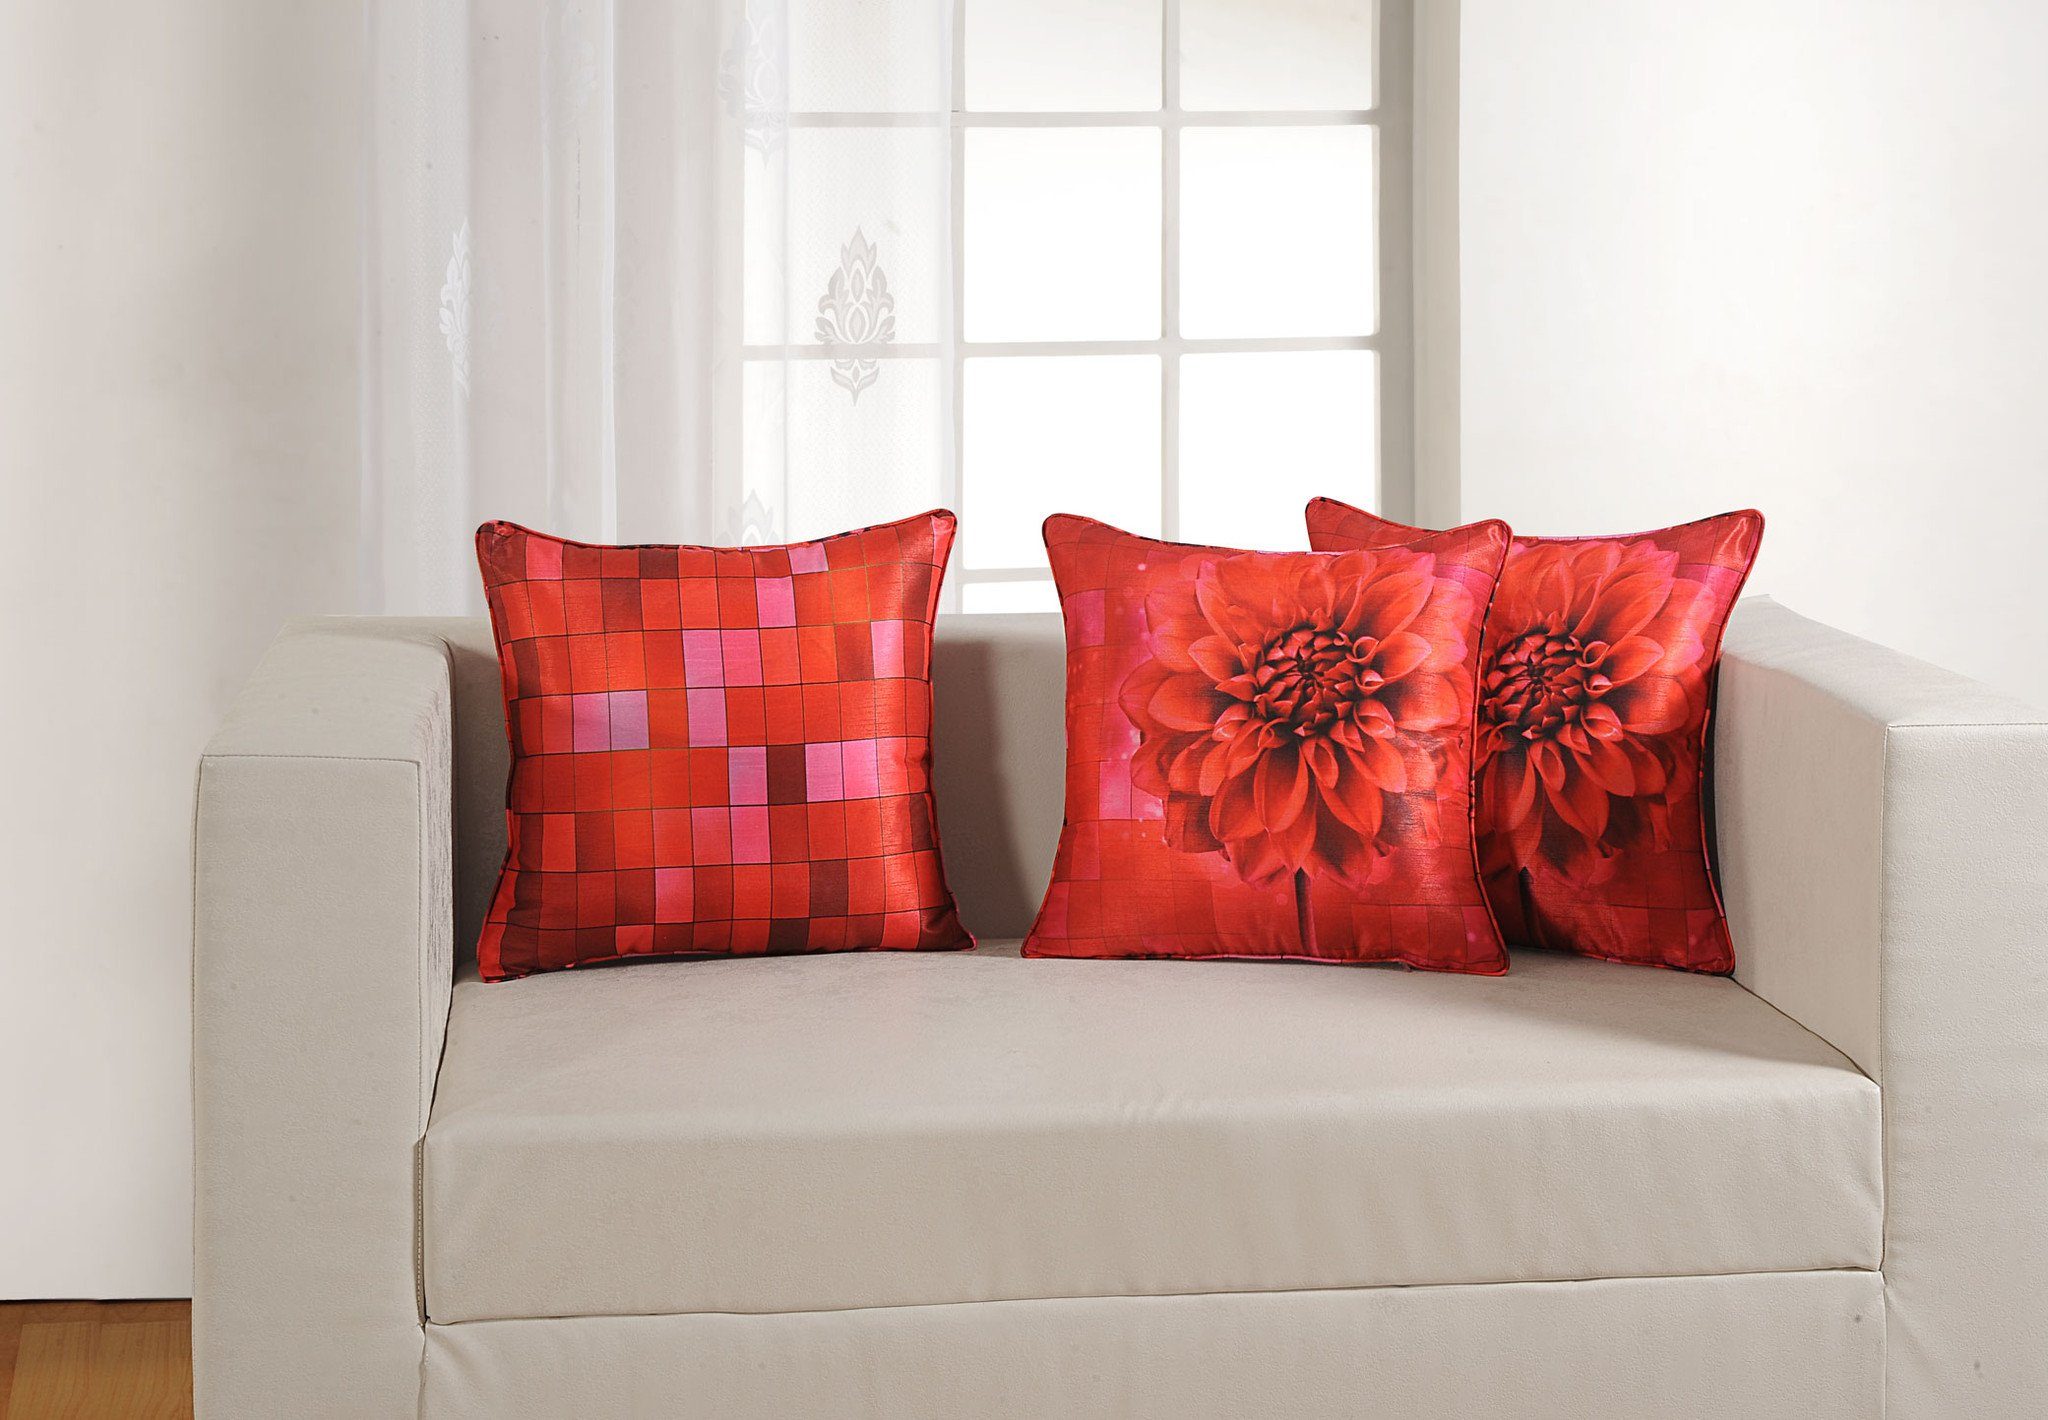 RED FLOWER CUSHION COVER - Flickdeal.co.nz